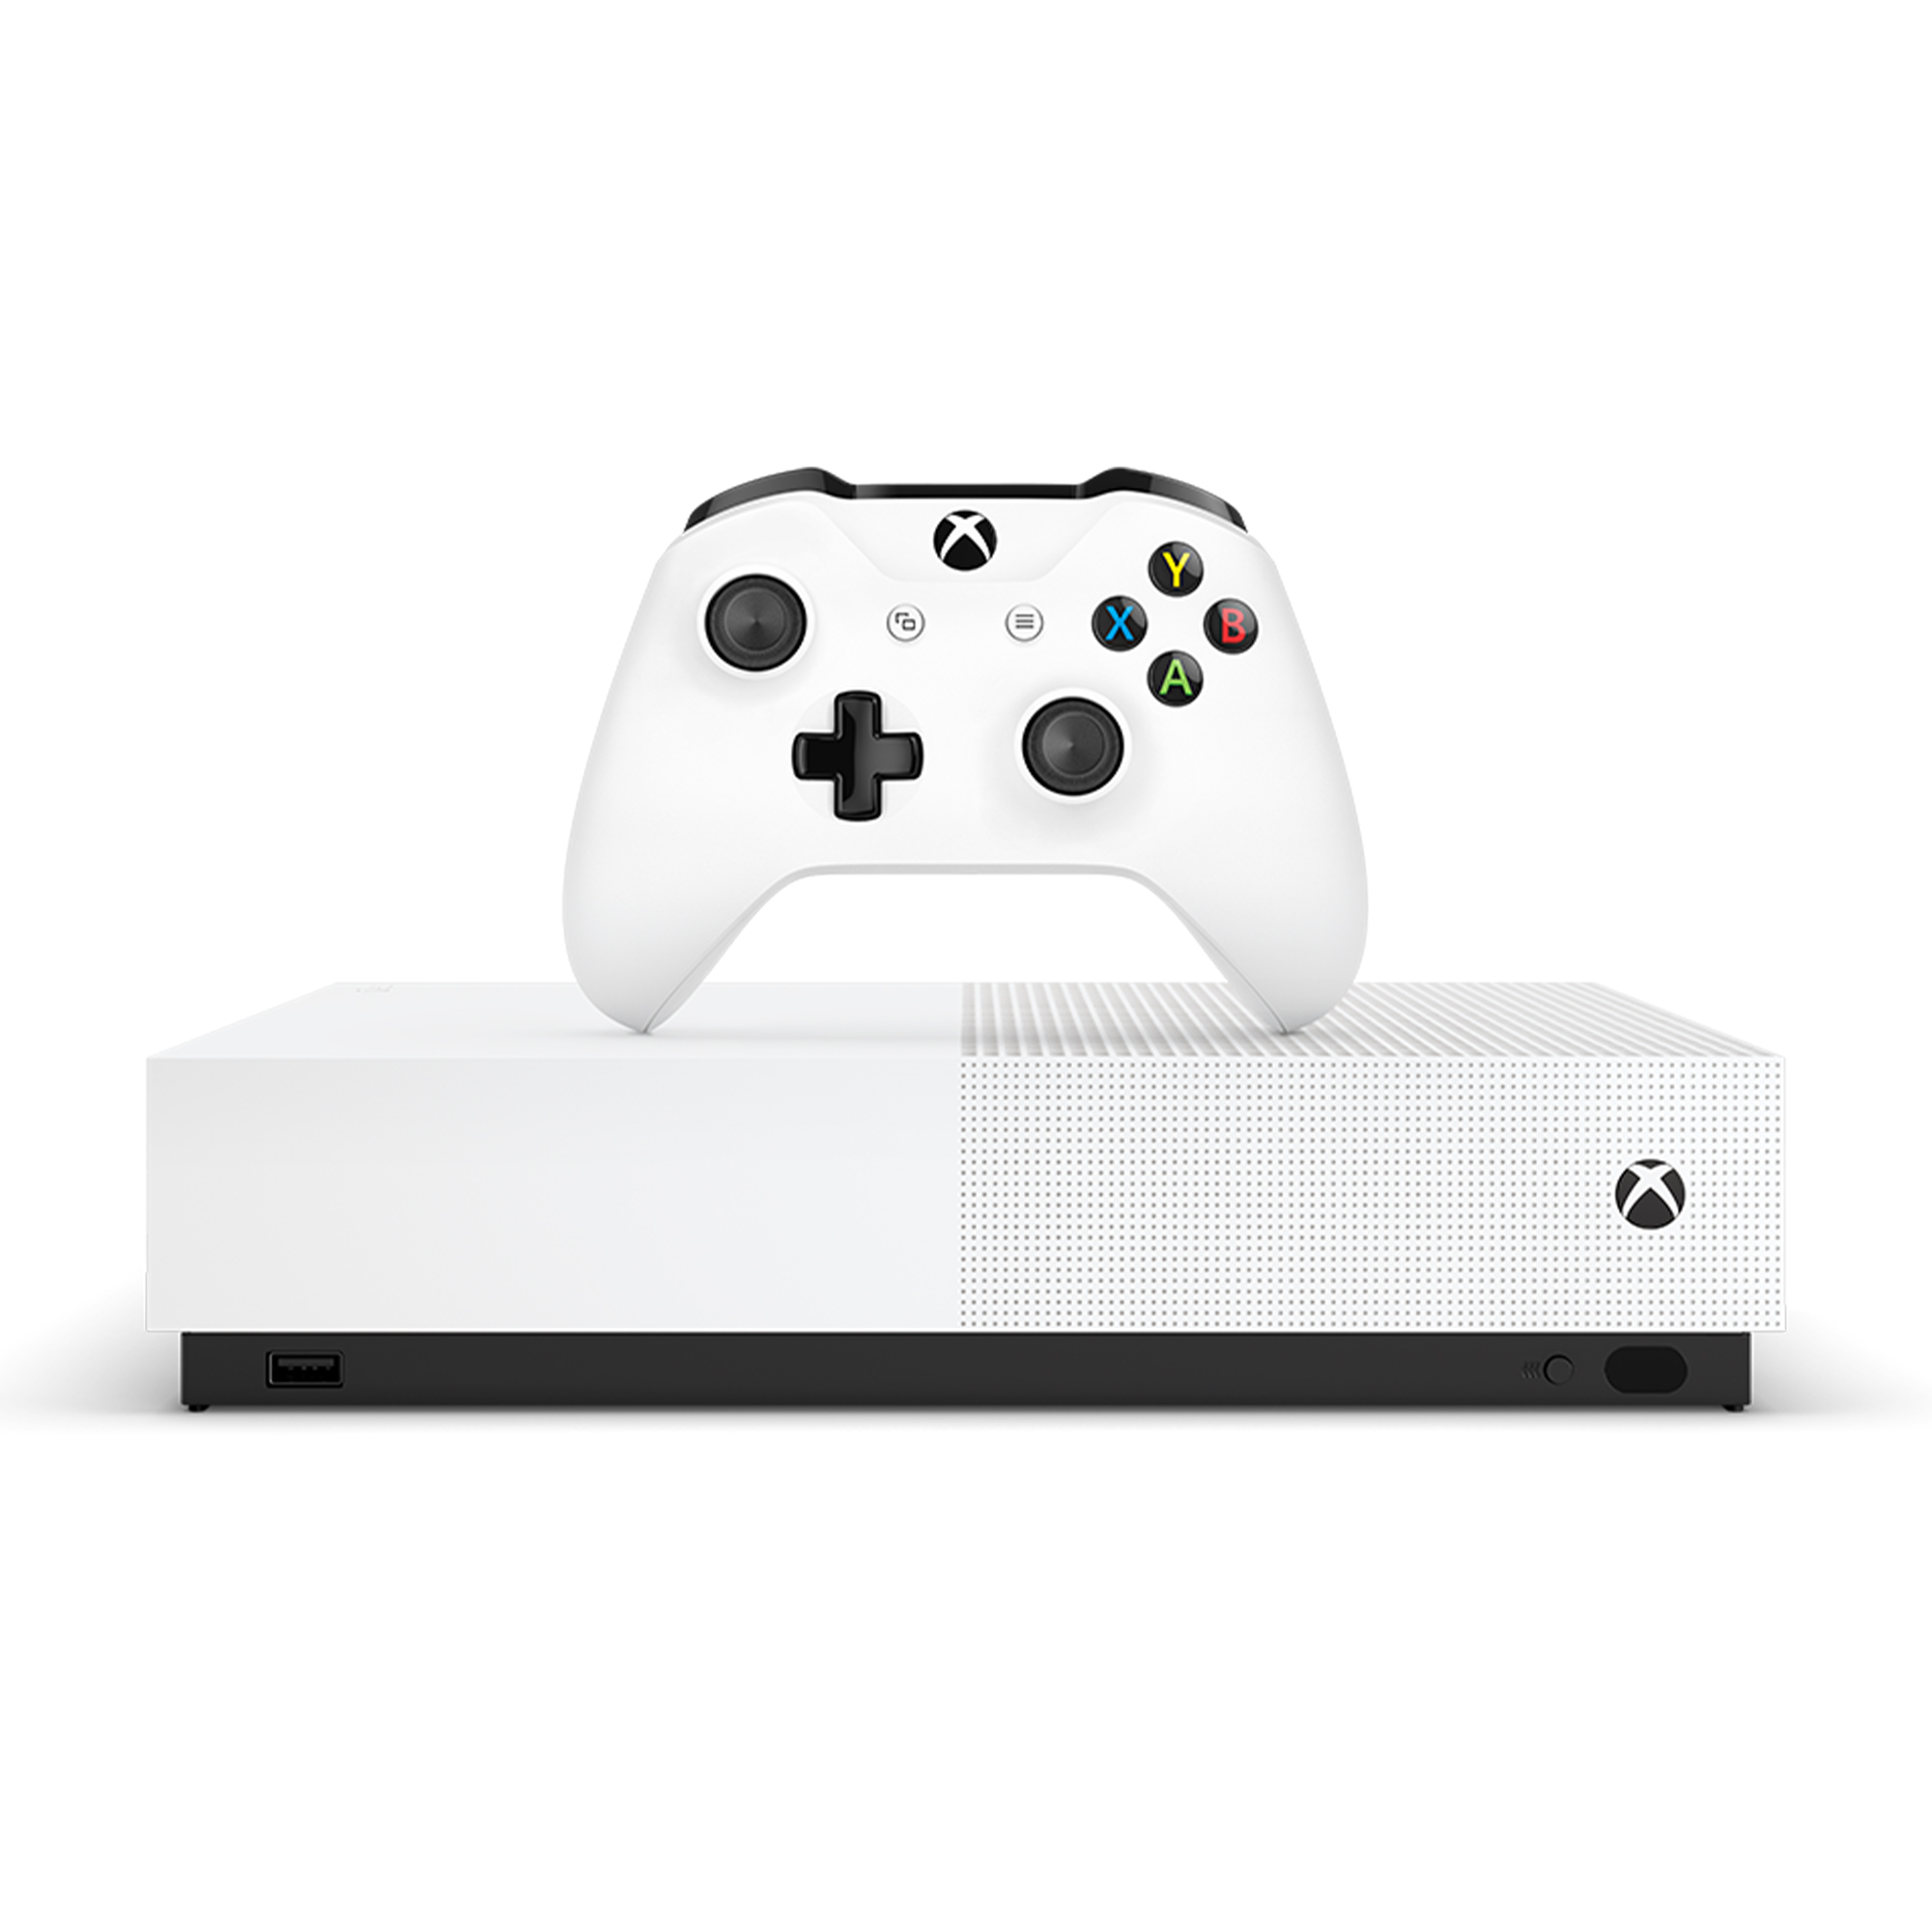 Microsoft Xbox One S 1TB All-Digital Edition Console (Disc-free Gaming), White, NJP-00024 - image 1 of 10